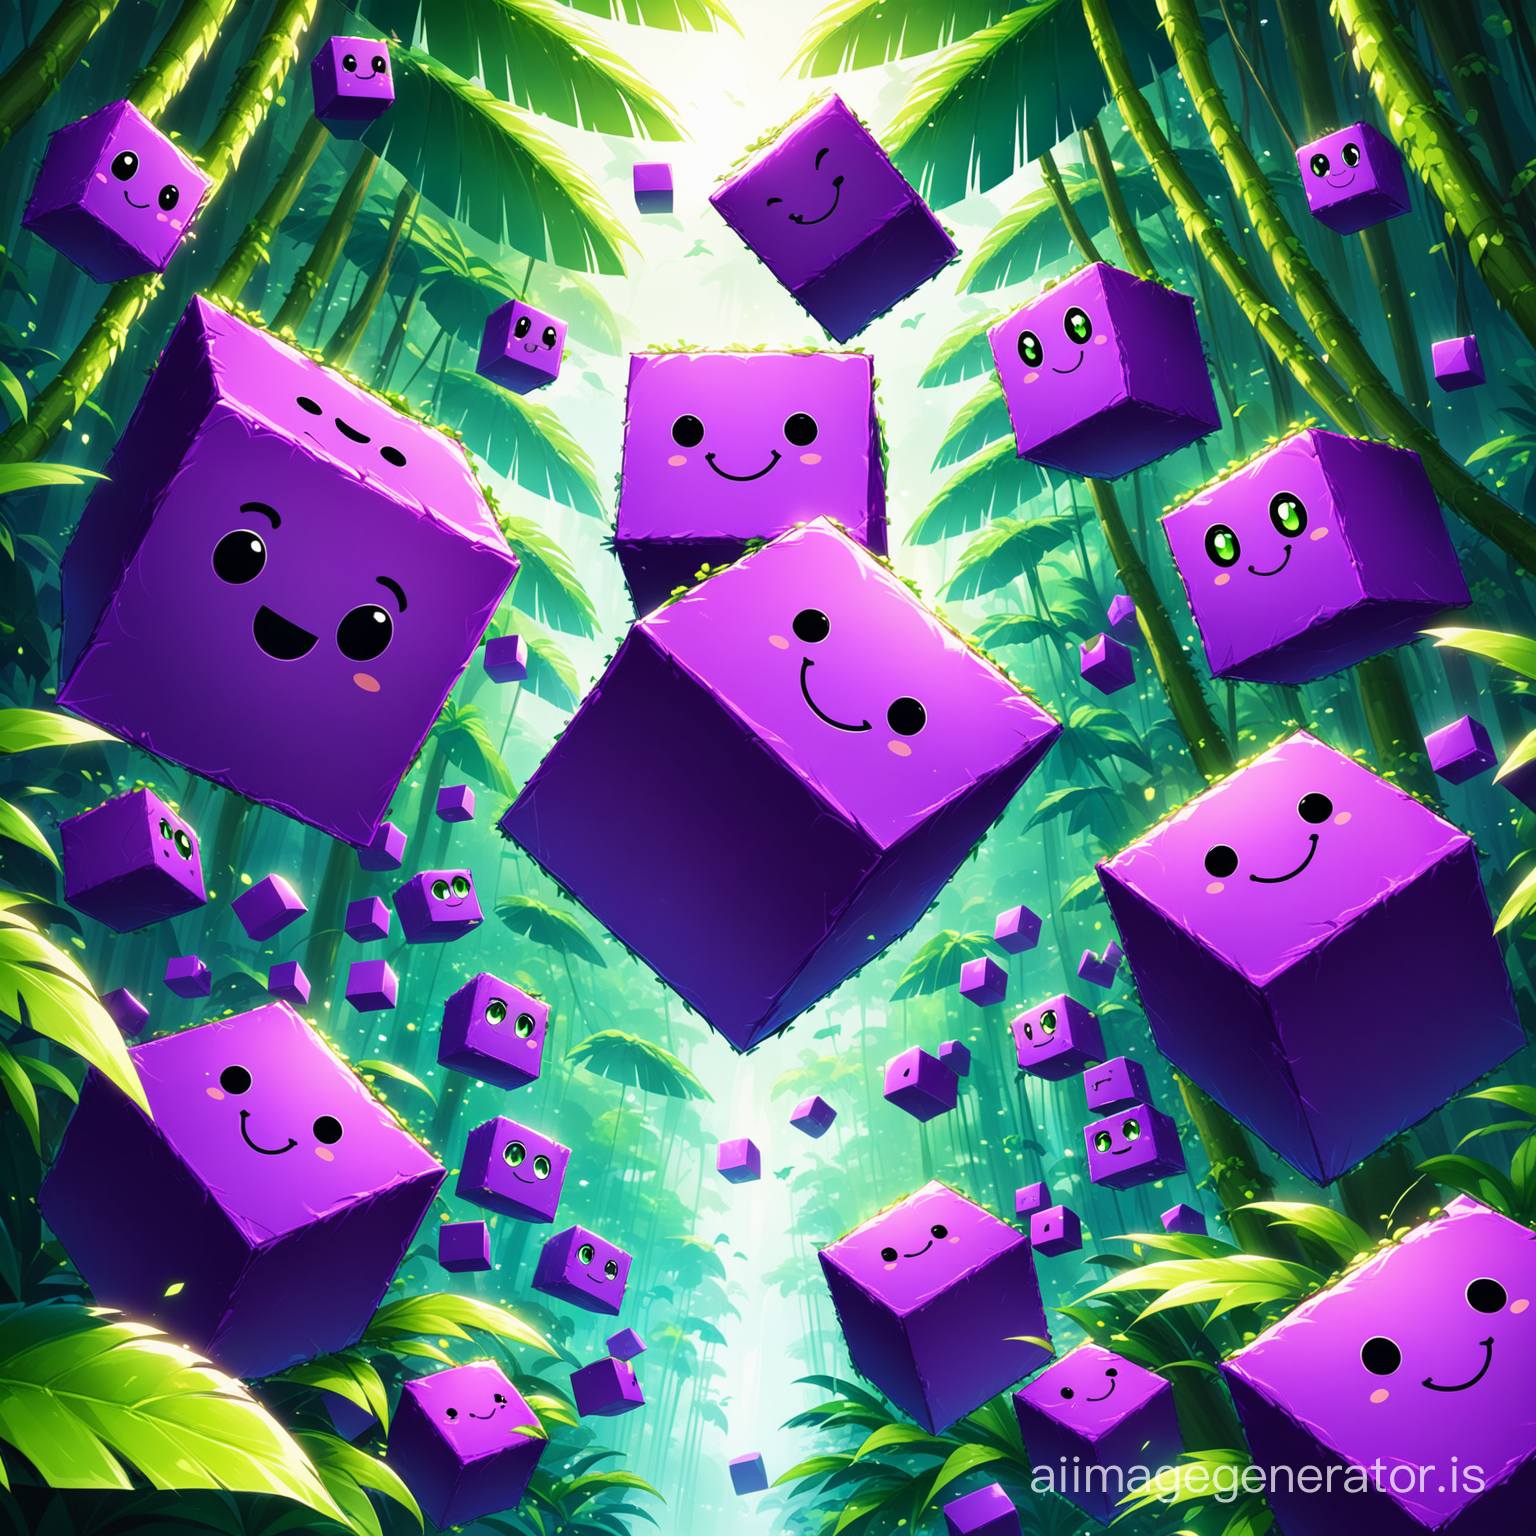 A little black happy cute purple blocks with green eye and smile flying on the jungle with super detail and High Quality
big and purple blocks and floating are seen everywhere
Details are evident beautifully and with great precision